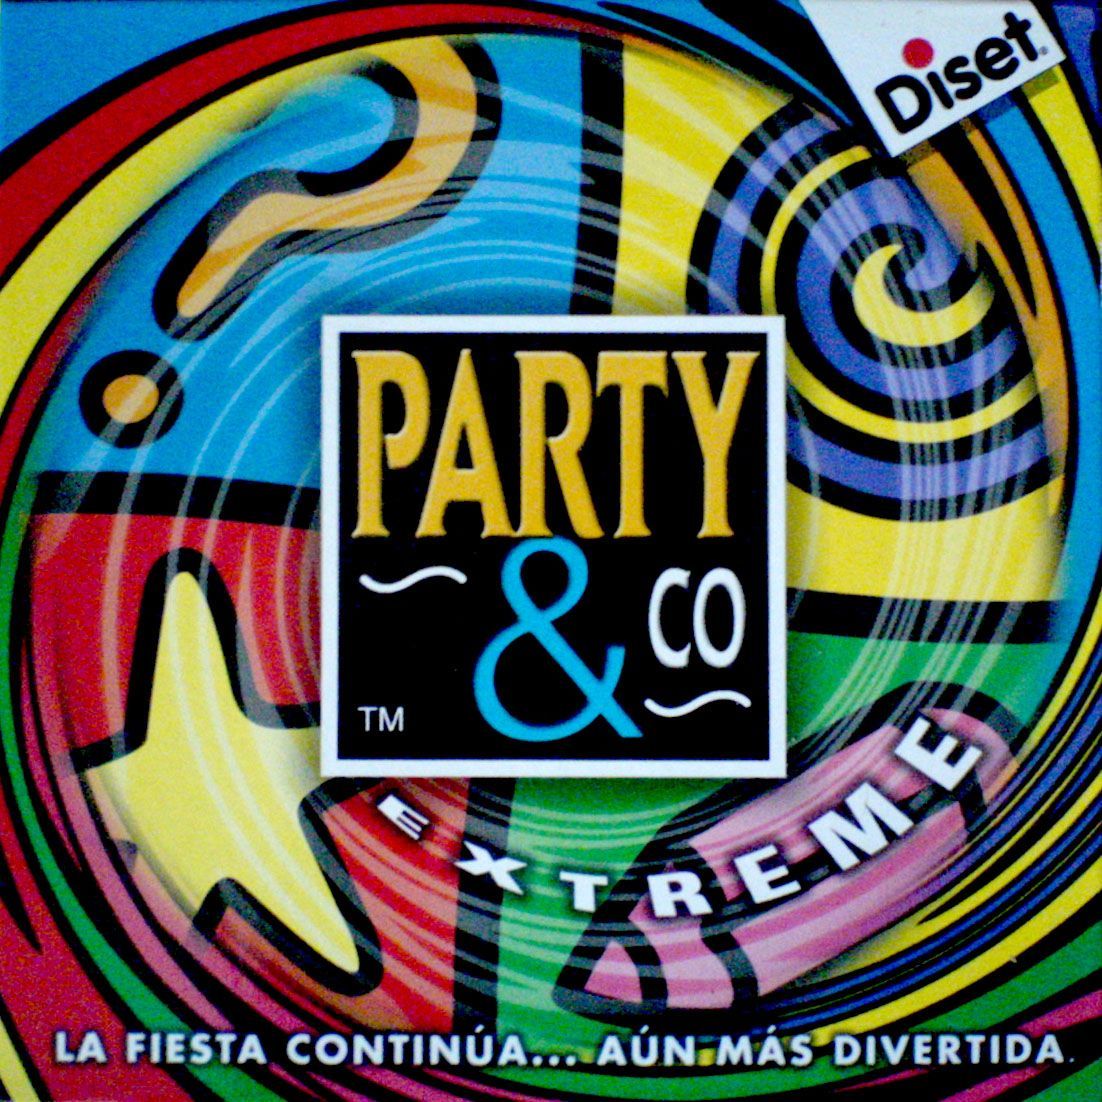 Party & Co: Extreme